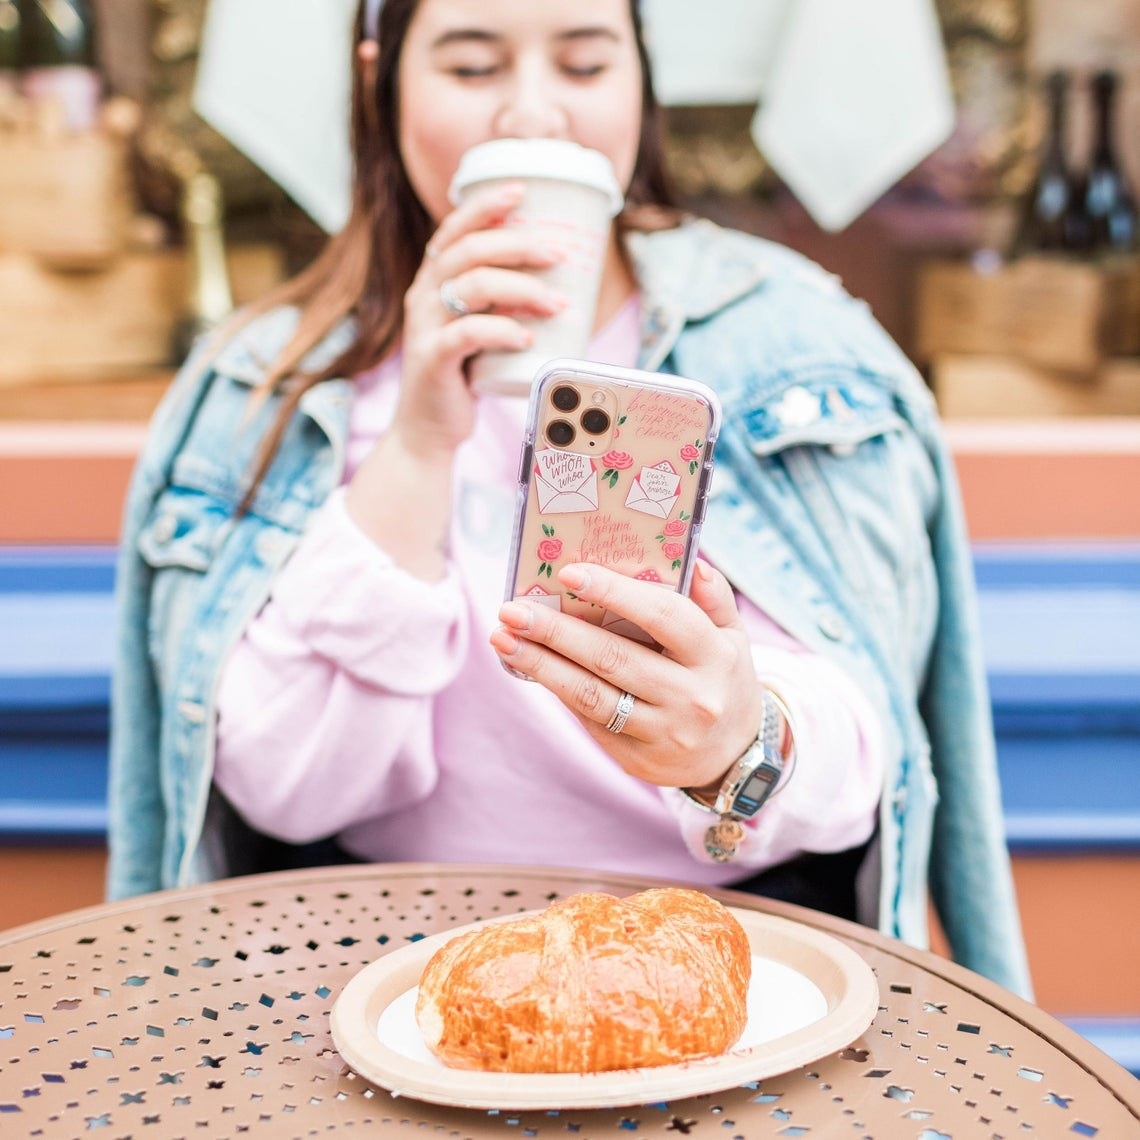 A person sitting at a table holding their phone up to take a picture of a pastry